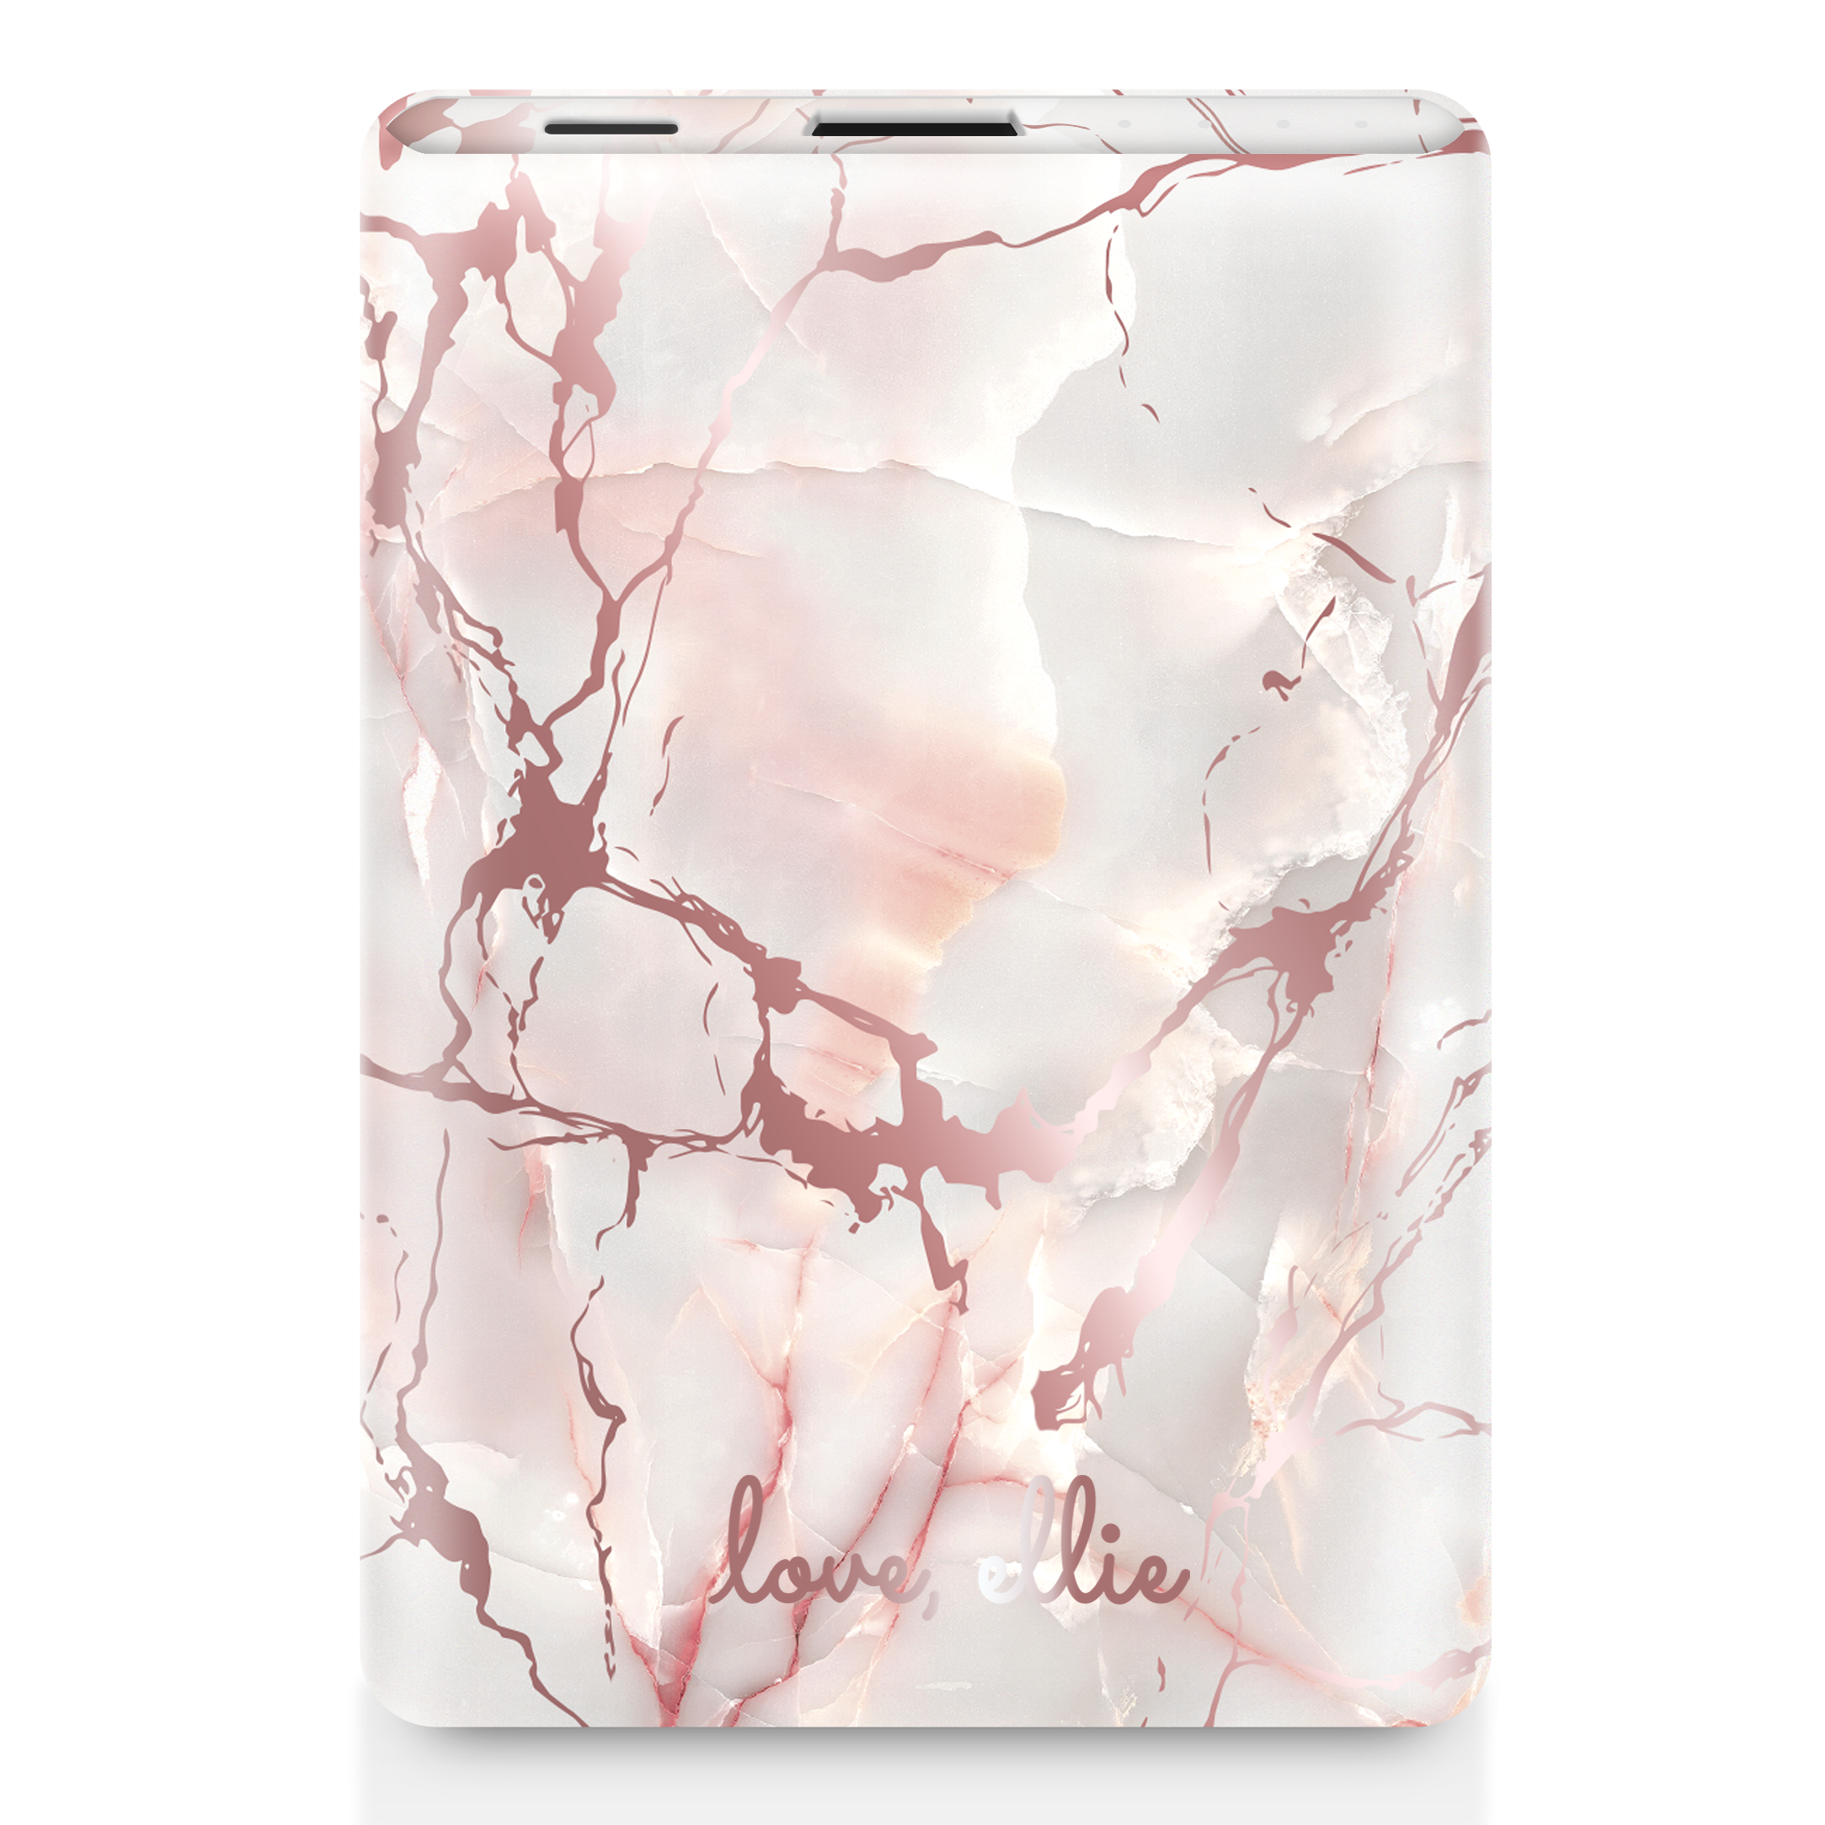 K120 Power Bank Charger - Luxury Marble